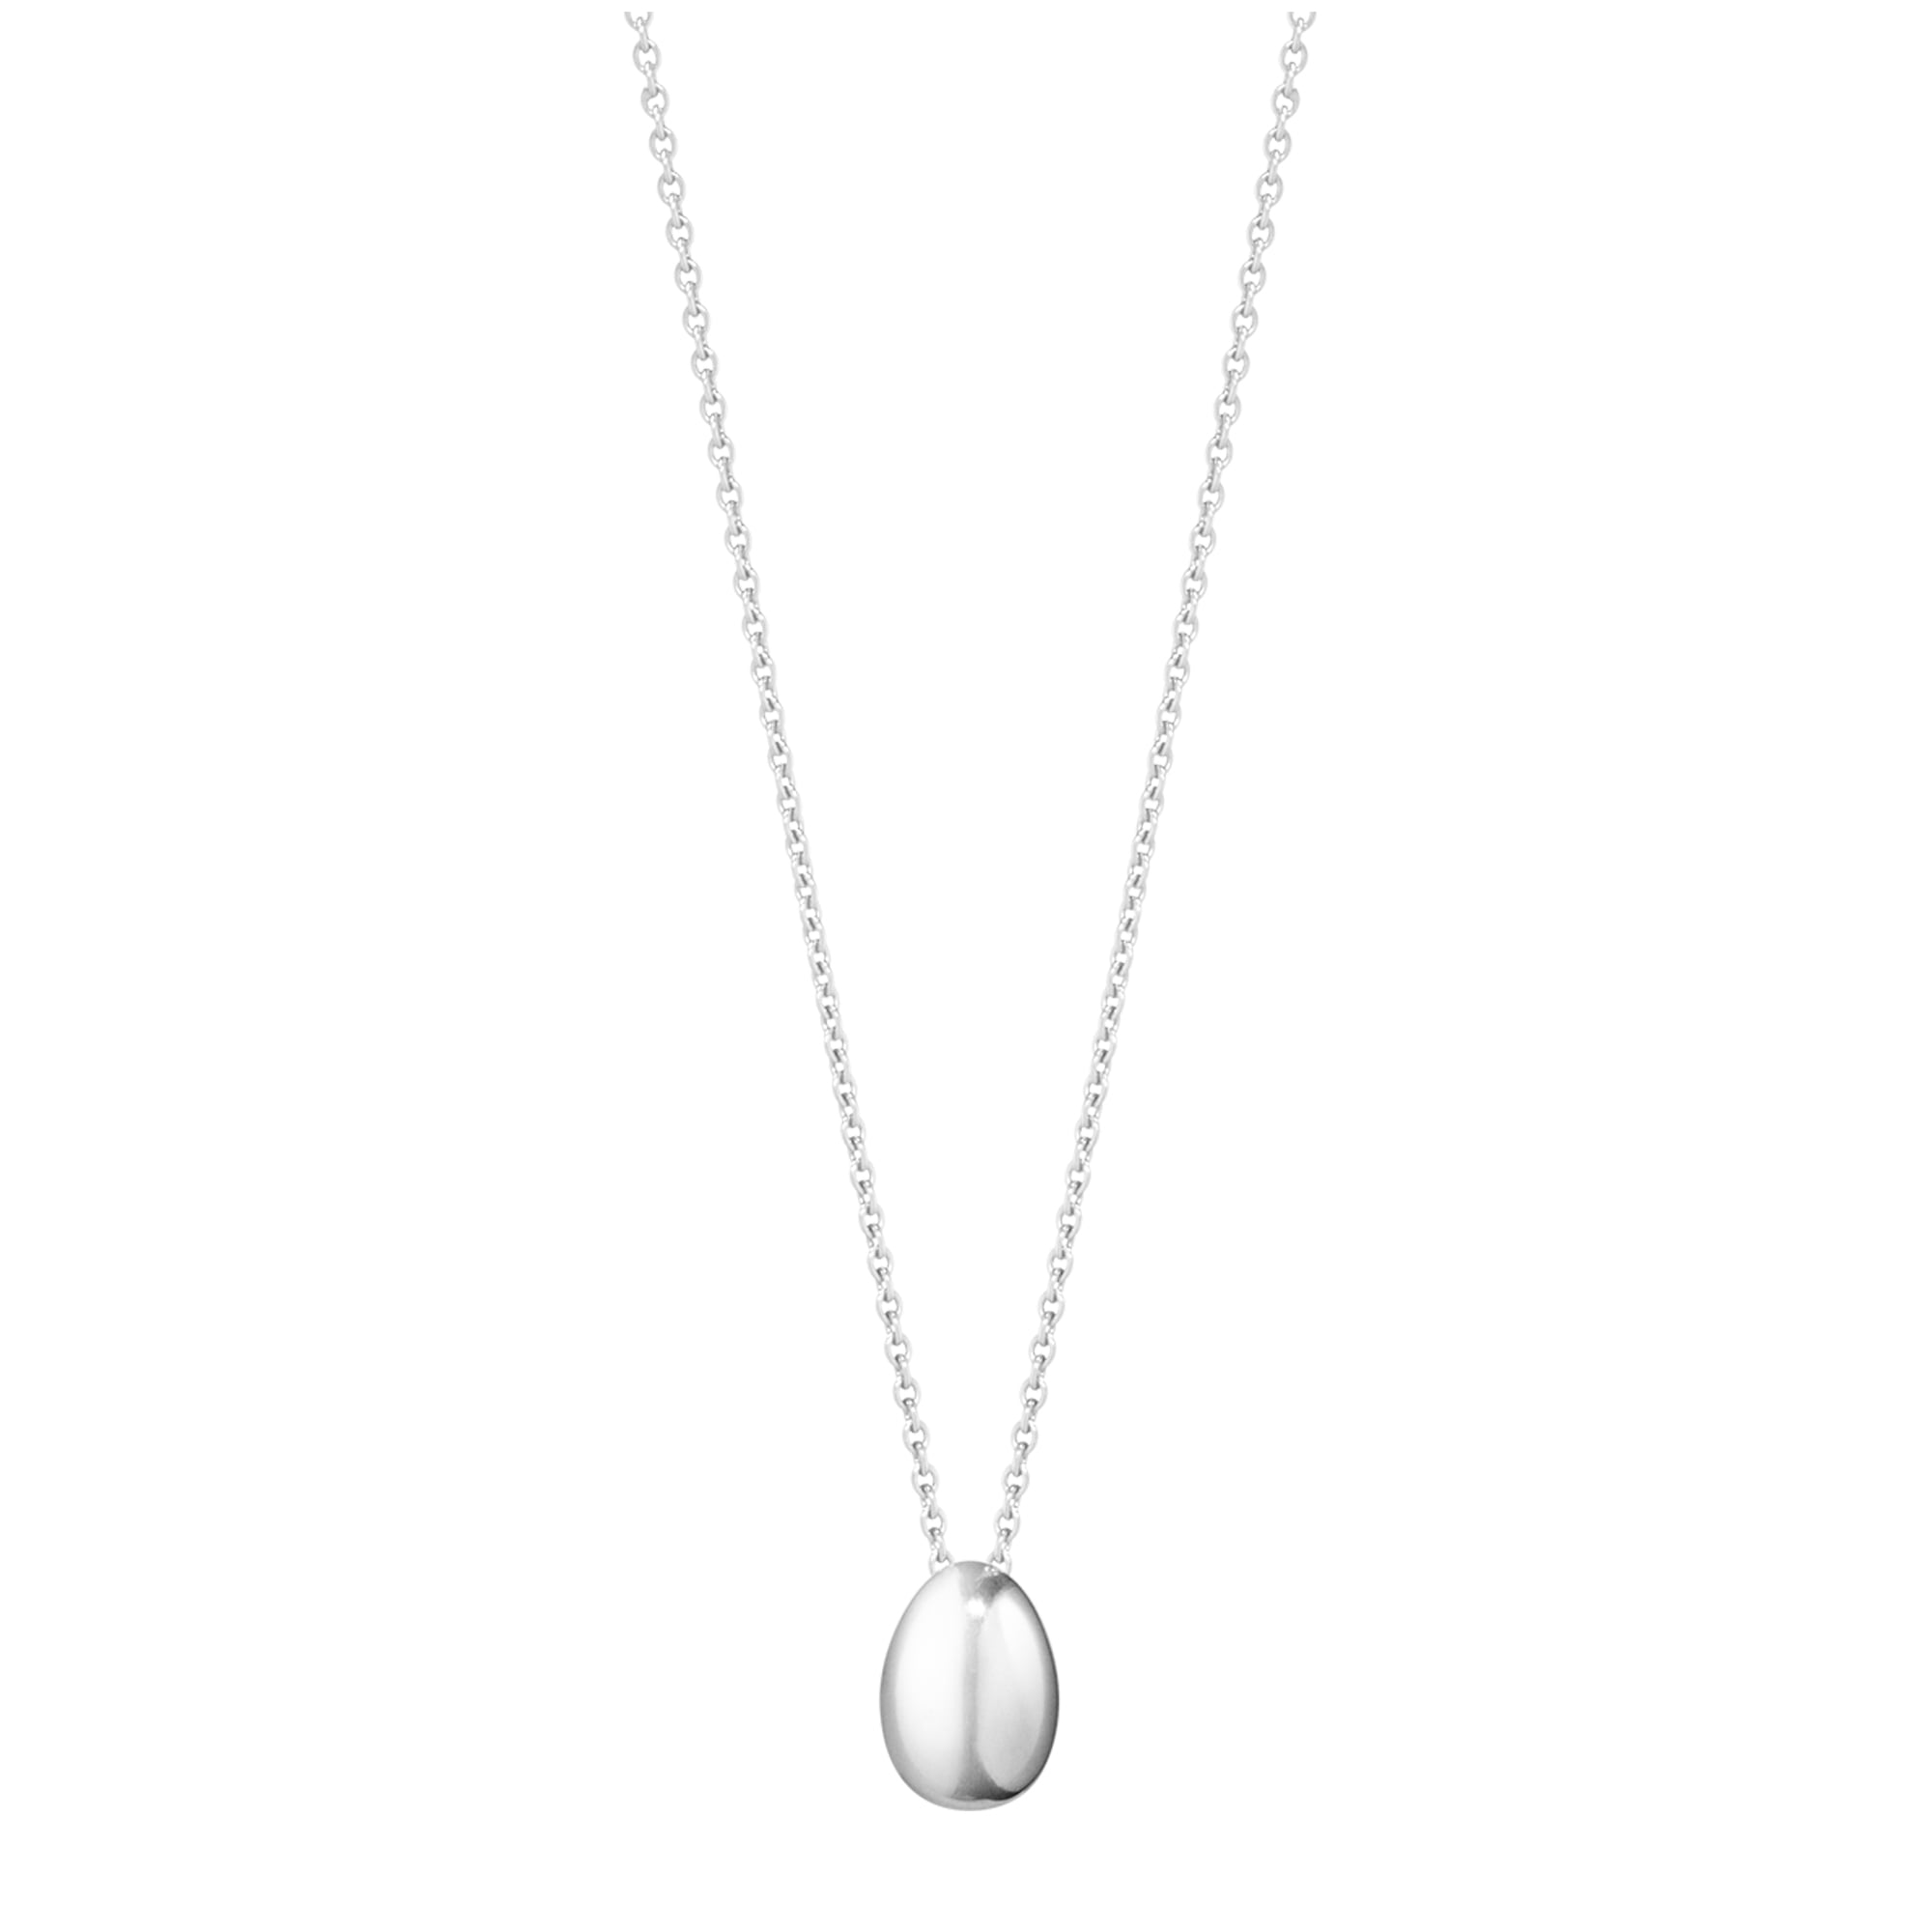 Astrid Polished Sterling Silver Necklace